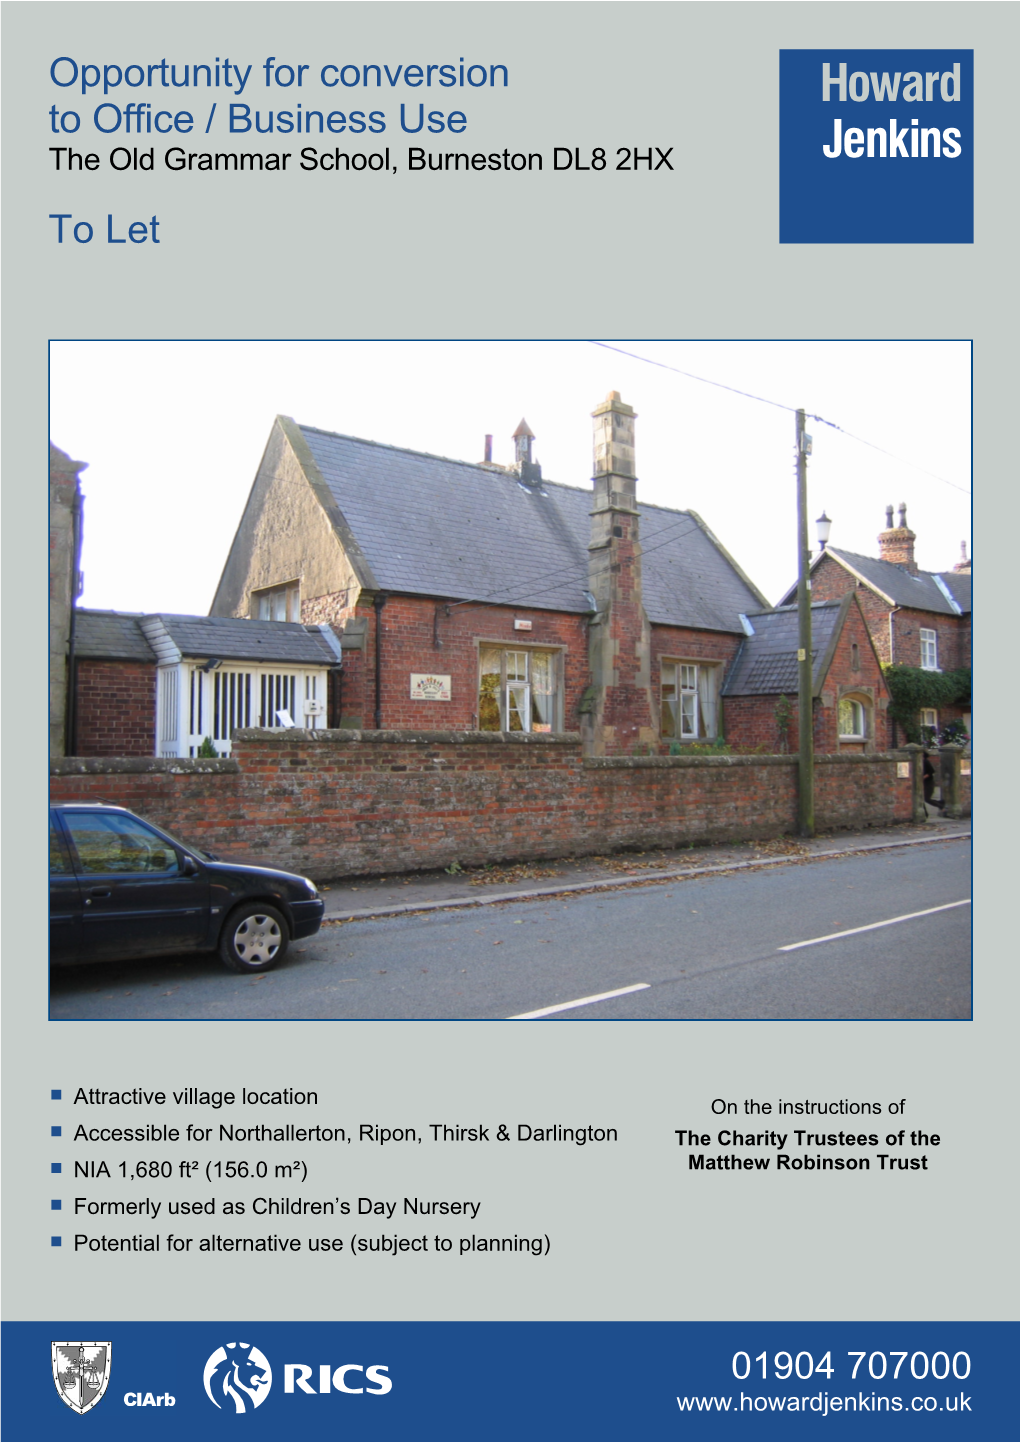 Opportunity for Conversion to Office / Business Use the Old Grammar School, Burneston DL8 2HX to Let